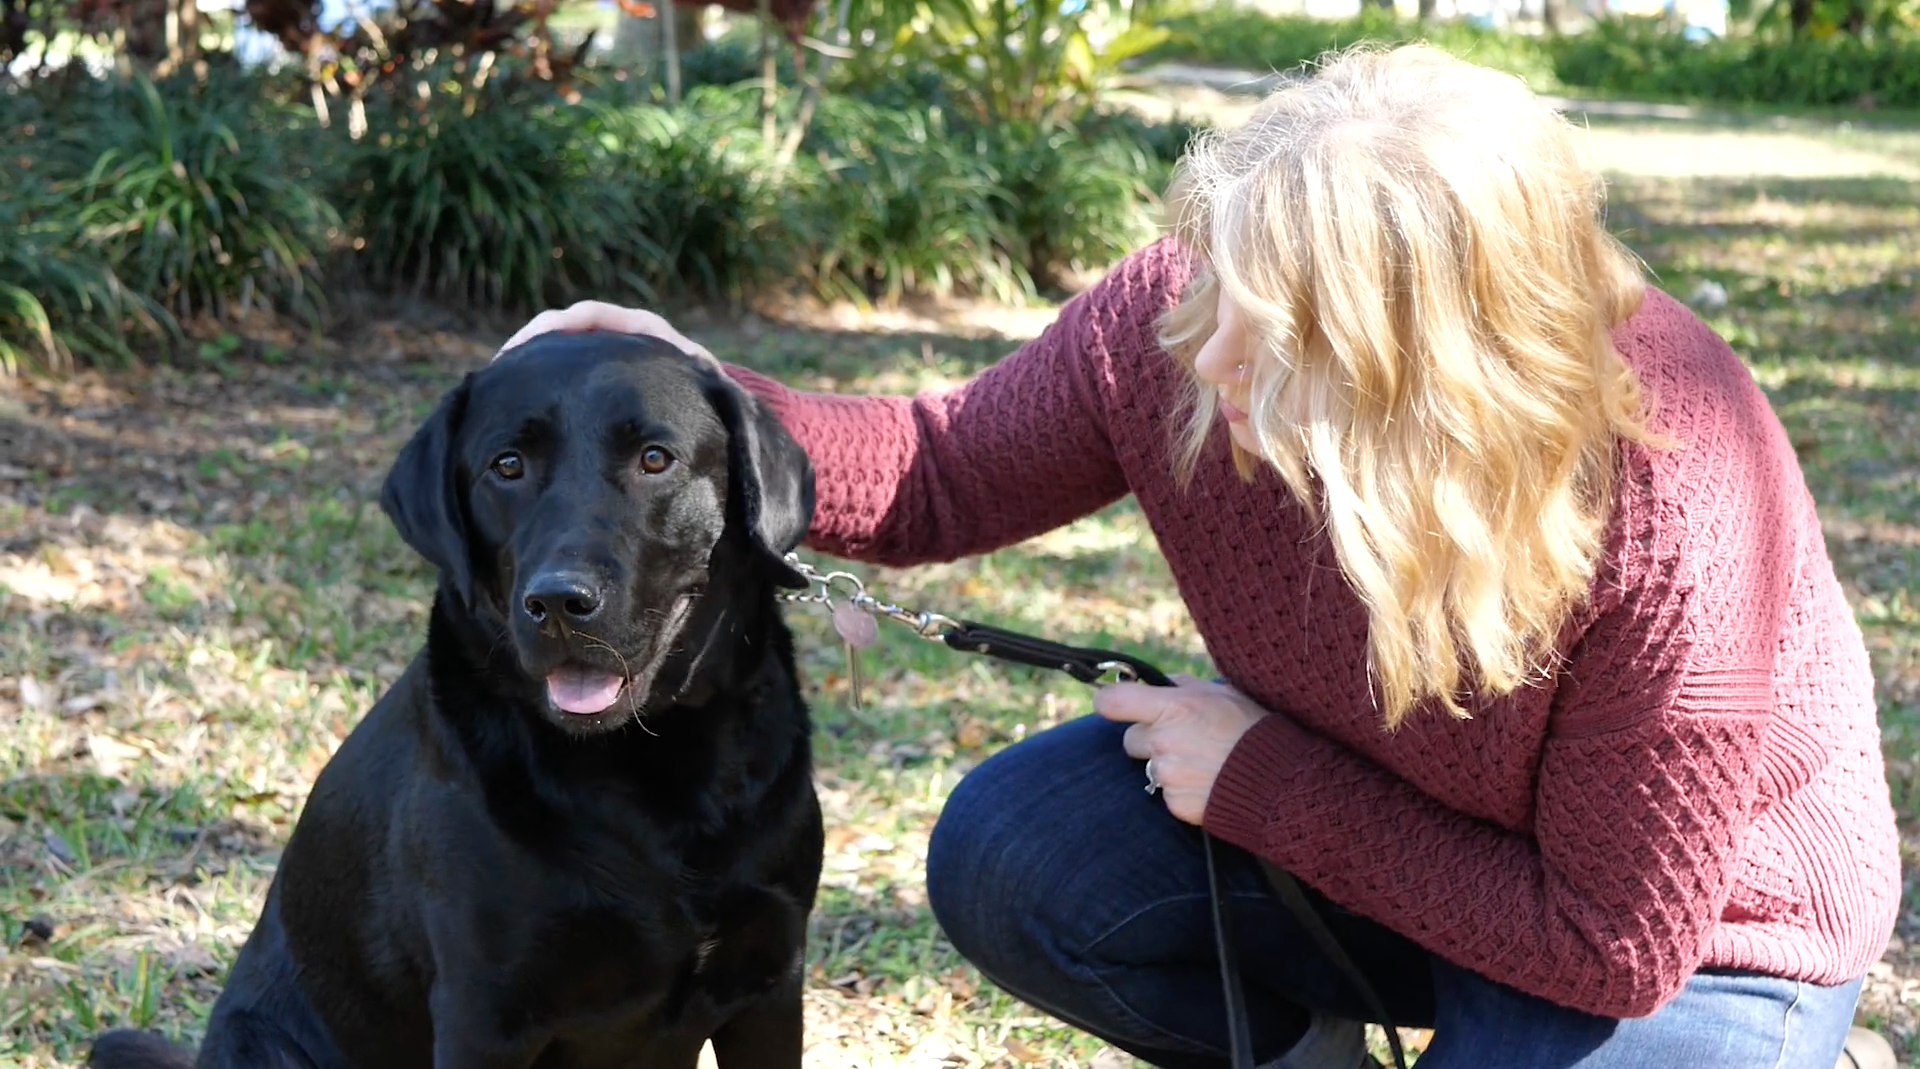 Woman kneels next to black lab and pets its head